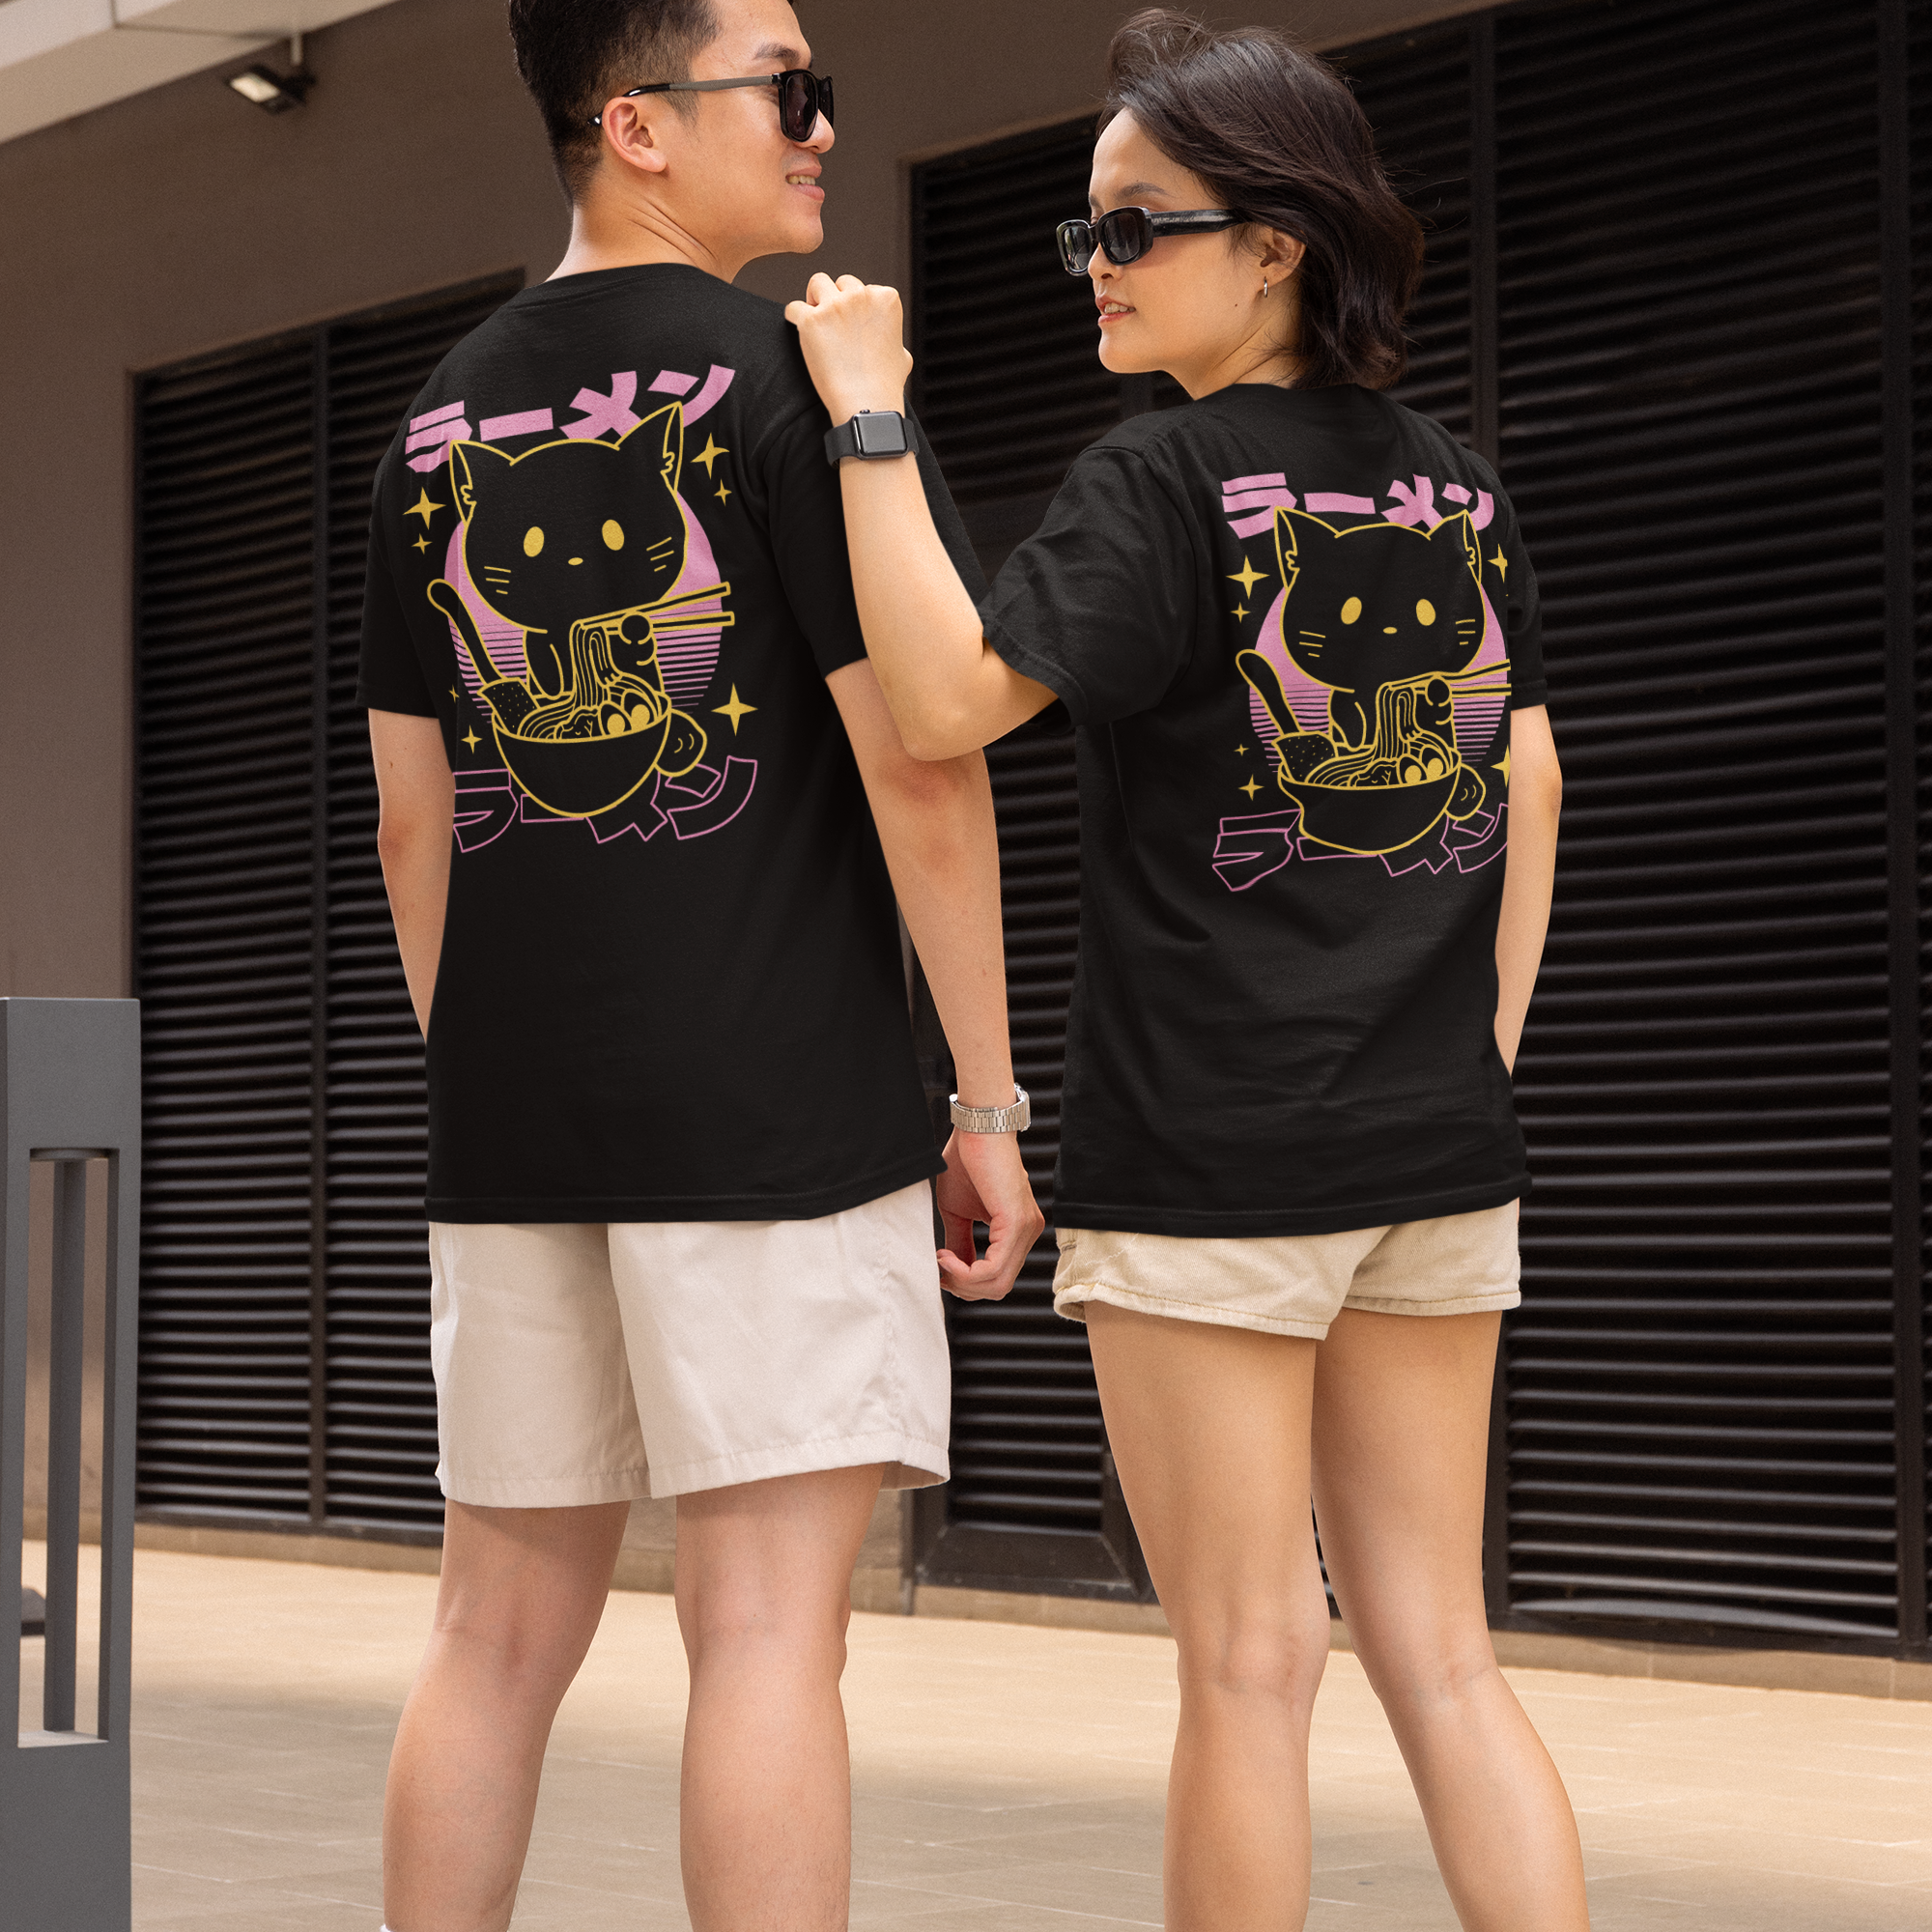 back-view-gildan-t-shirt-mockup-featuring-a-smiling-man-and-woman-in-an-urban-street-m39605_1.png